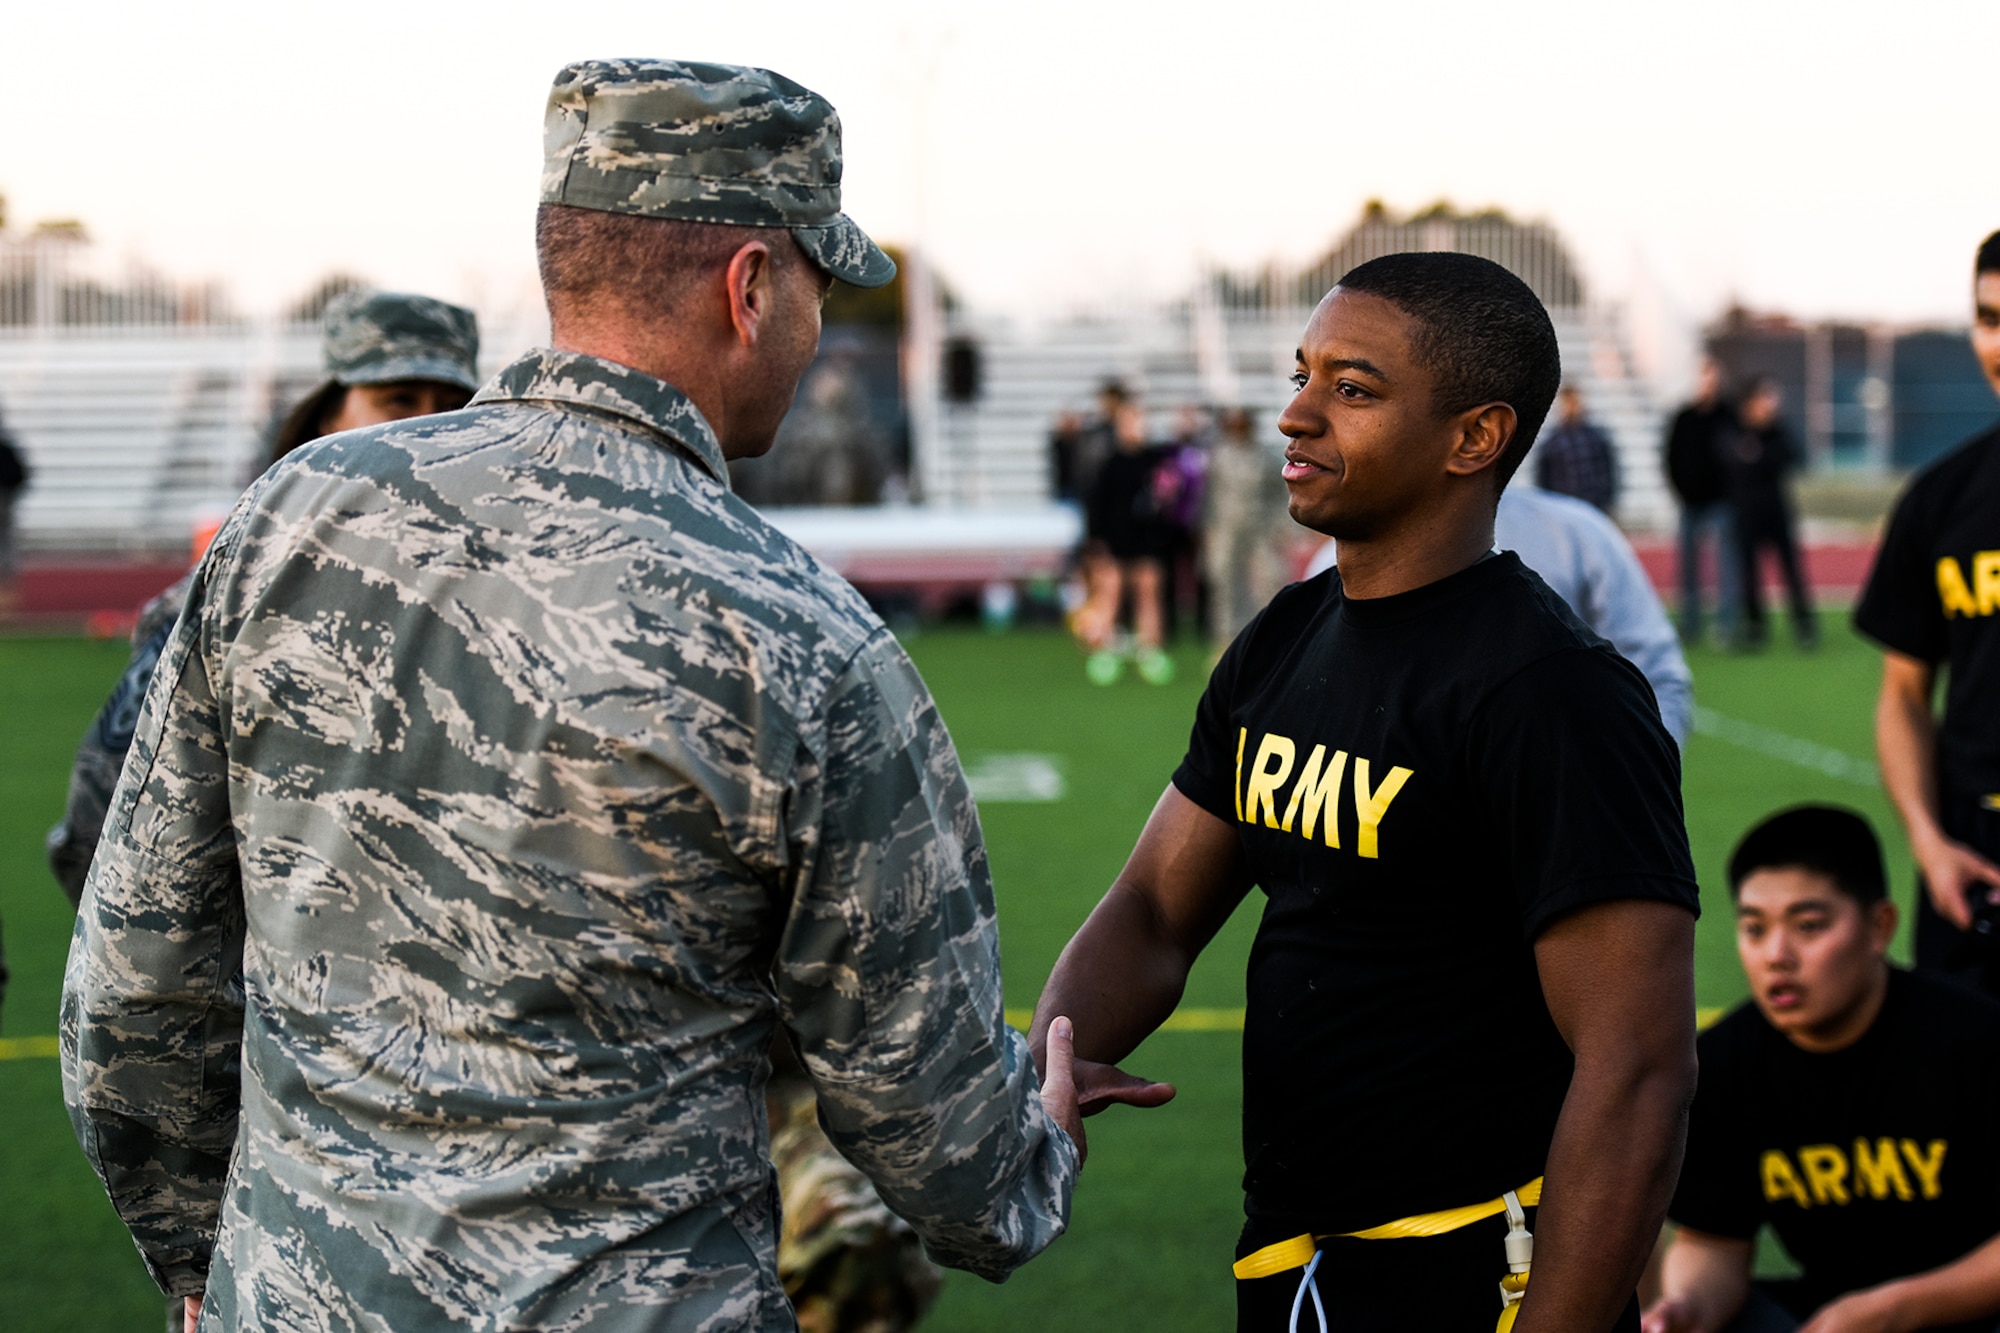 U.S. Air Force Col. Michael L. Downs, 17th Training Wing Commander, congratulates and presents U.S. Army Spc. Gerardo Aponte, 344th Military Intelligence Battalion student, with a coin after winning the annual Army and Navy football game on Goodfellow Air Force Base, Texas, Nov. 24, 2015. (U.S. Air Force Photo by Airman 1st Class Devin Boyer/Released)